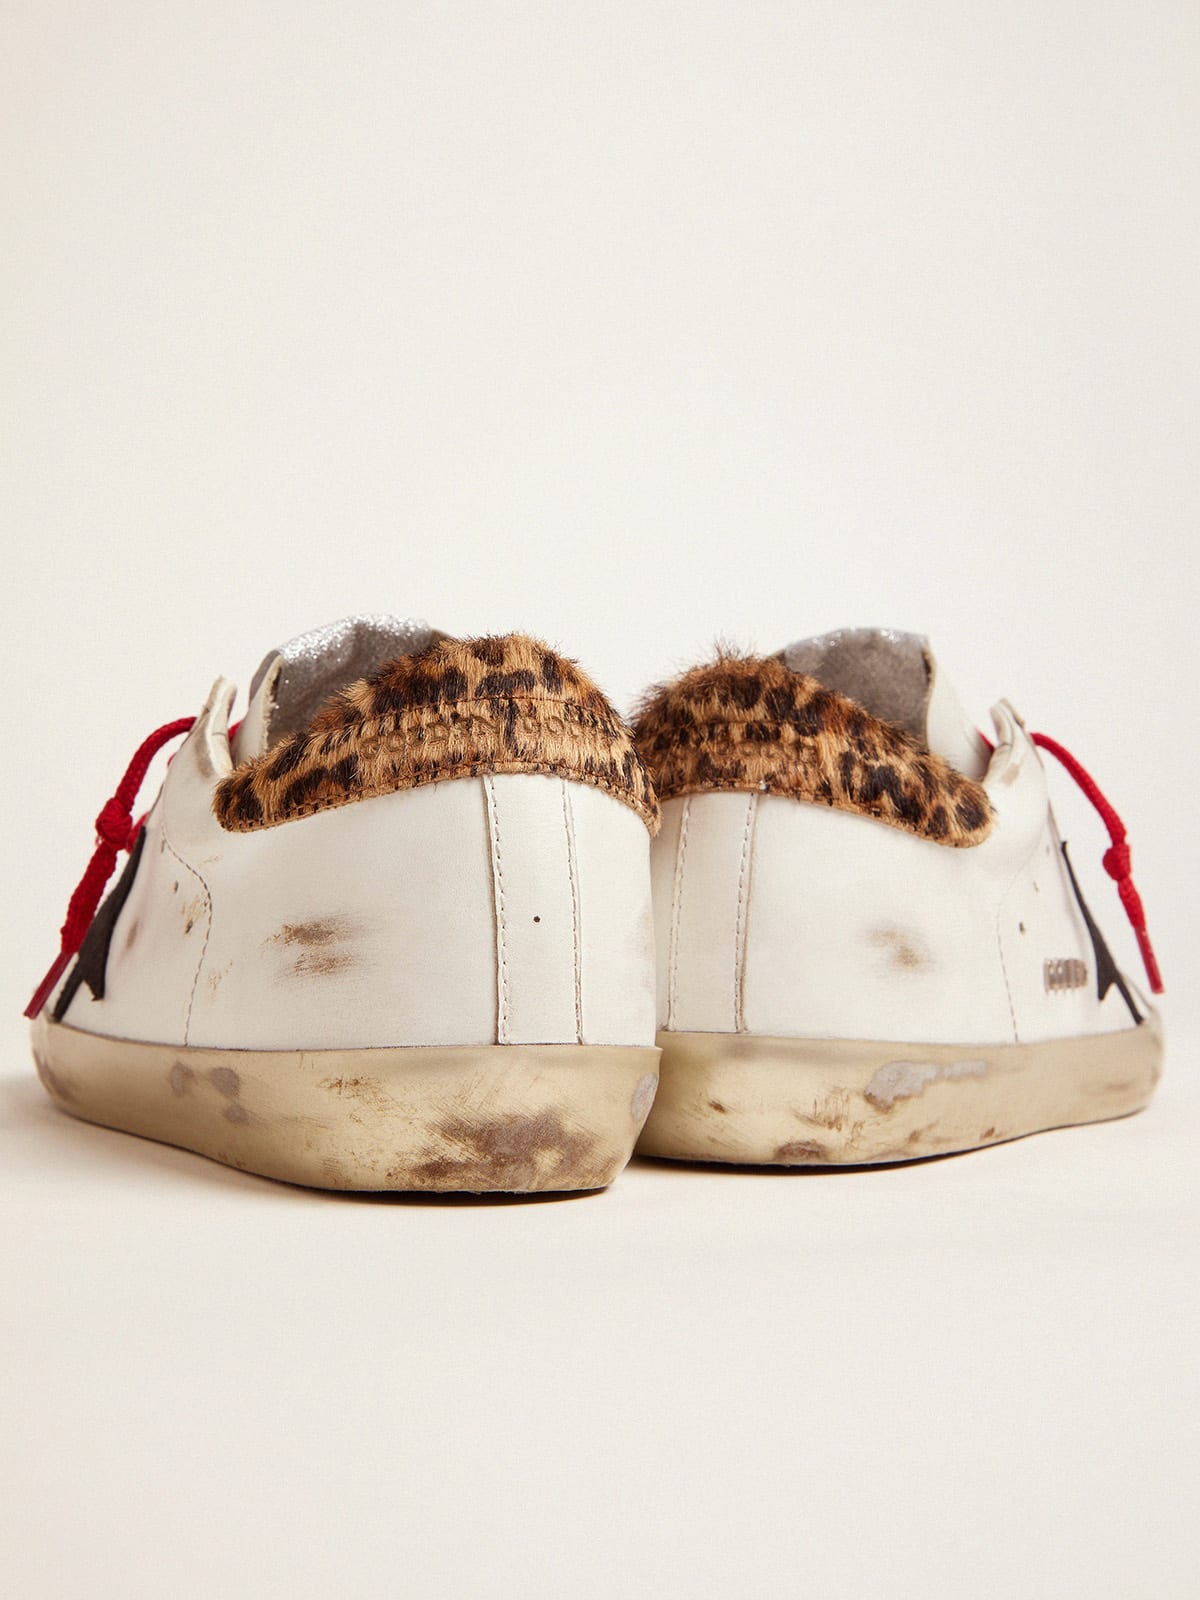 Super-Star sneakers with leopard-print heel tab and red laces | Golden Goose